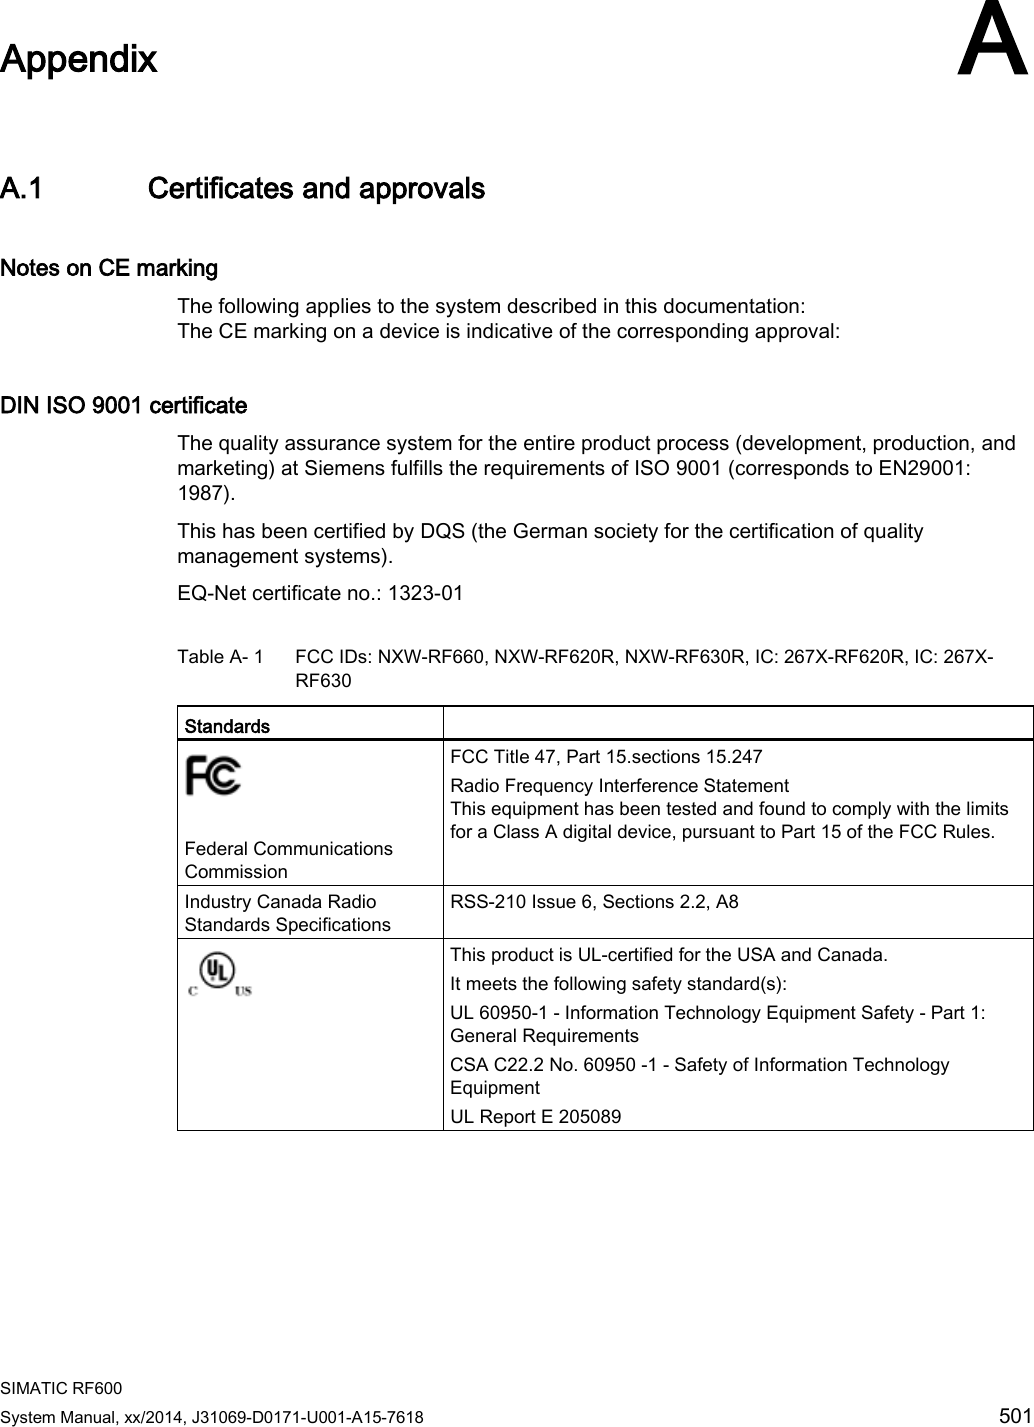  SIMATIC RF600 System Manual, xx/2014, J31069-D0171-U001-A15-7618 501  Appendix A A.1 Certificates and approvals Notes on CE marking The following applies to the system described in this documentation:  The CE marking on a device is indicative of the corresponding approval: DIN ISO 9001 certificate The quality assurance system for the entire product process (development, production, and marketing) at Siemens fulfills the requirements of ISO 9001 (corresponds to EN29001: 1987). This has been certified by DQS (the German society for the certification of quality management systems). EQ-Net certificate no.: 1323-01 Table A- 1  FCC IDs: NXW-RF660, NXW-RF620R, NXW-RF630R, IC: 267X-RF620R, IC: 267X-RF630 Standards    Federal Communications Commission  FCC Title 47, Part 15.sections 15.247 Radio Frequency Interference Statement  This equipment has been tested and found to comply with the limits for a Class A digital device, pursuant to Part 15 of the FCC Rules.  Industry Canada Radio Standards Specifications RSS-210 Issue 6, Sections 2.2, A8  This product is UL-certified for the USA and Canada. It meets the following safety standard(s):  UL 60950-1 - Information Technology Equipment Safety - Part 1: General Requirements CSA C22.2 No. 60950 -1 - Safety of Information Technology Equipment UL Report E 205089 